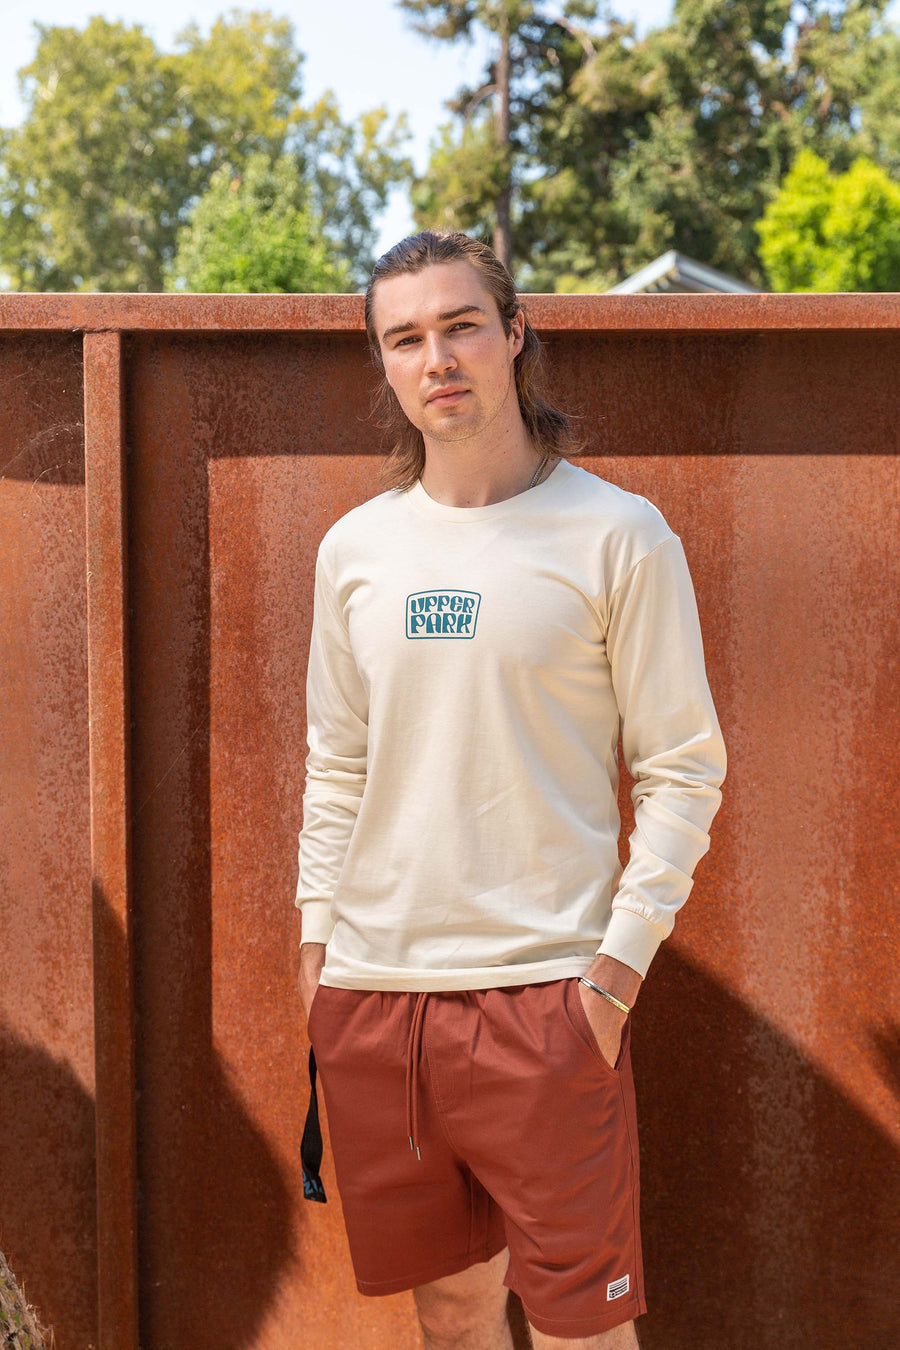 Find Your Park Long Sleeve Shirt